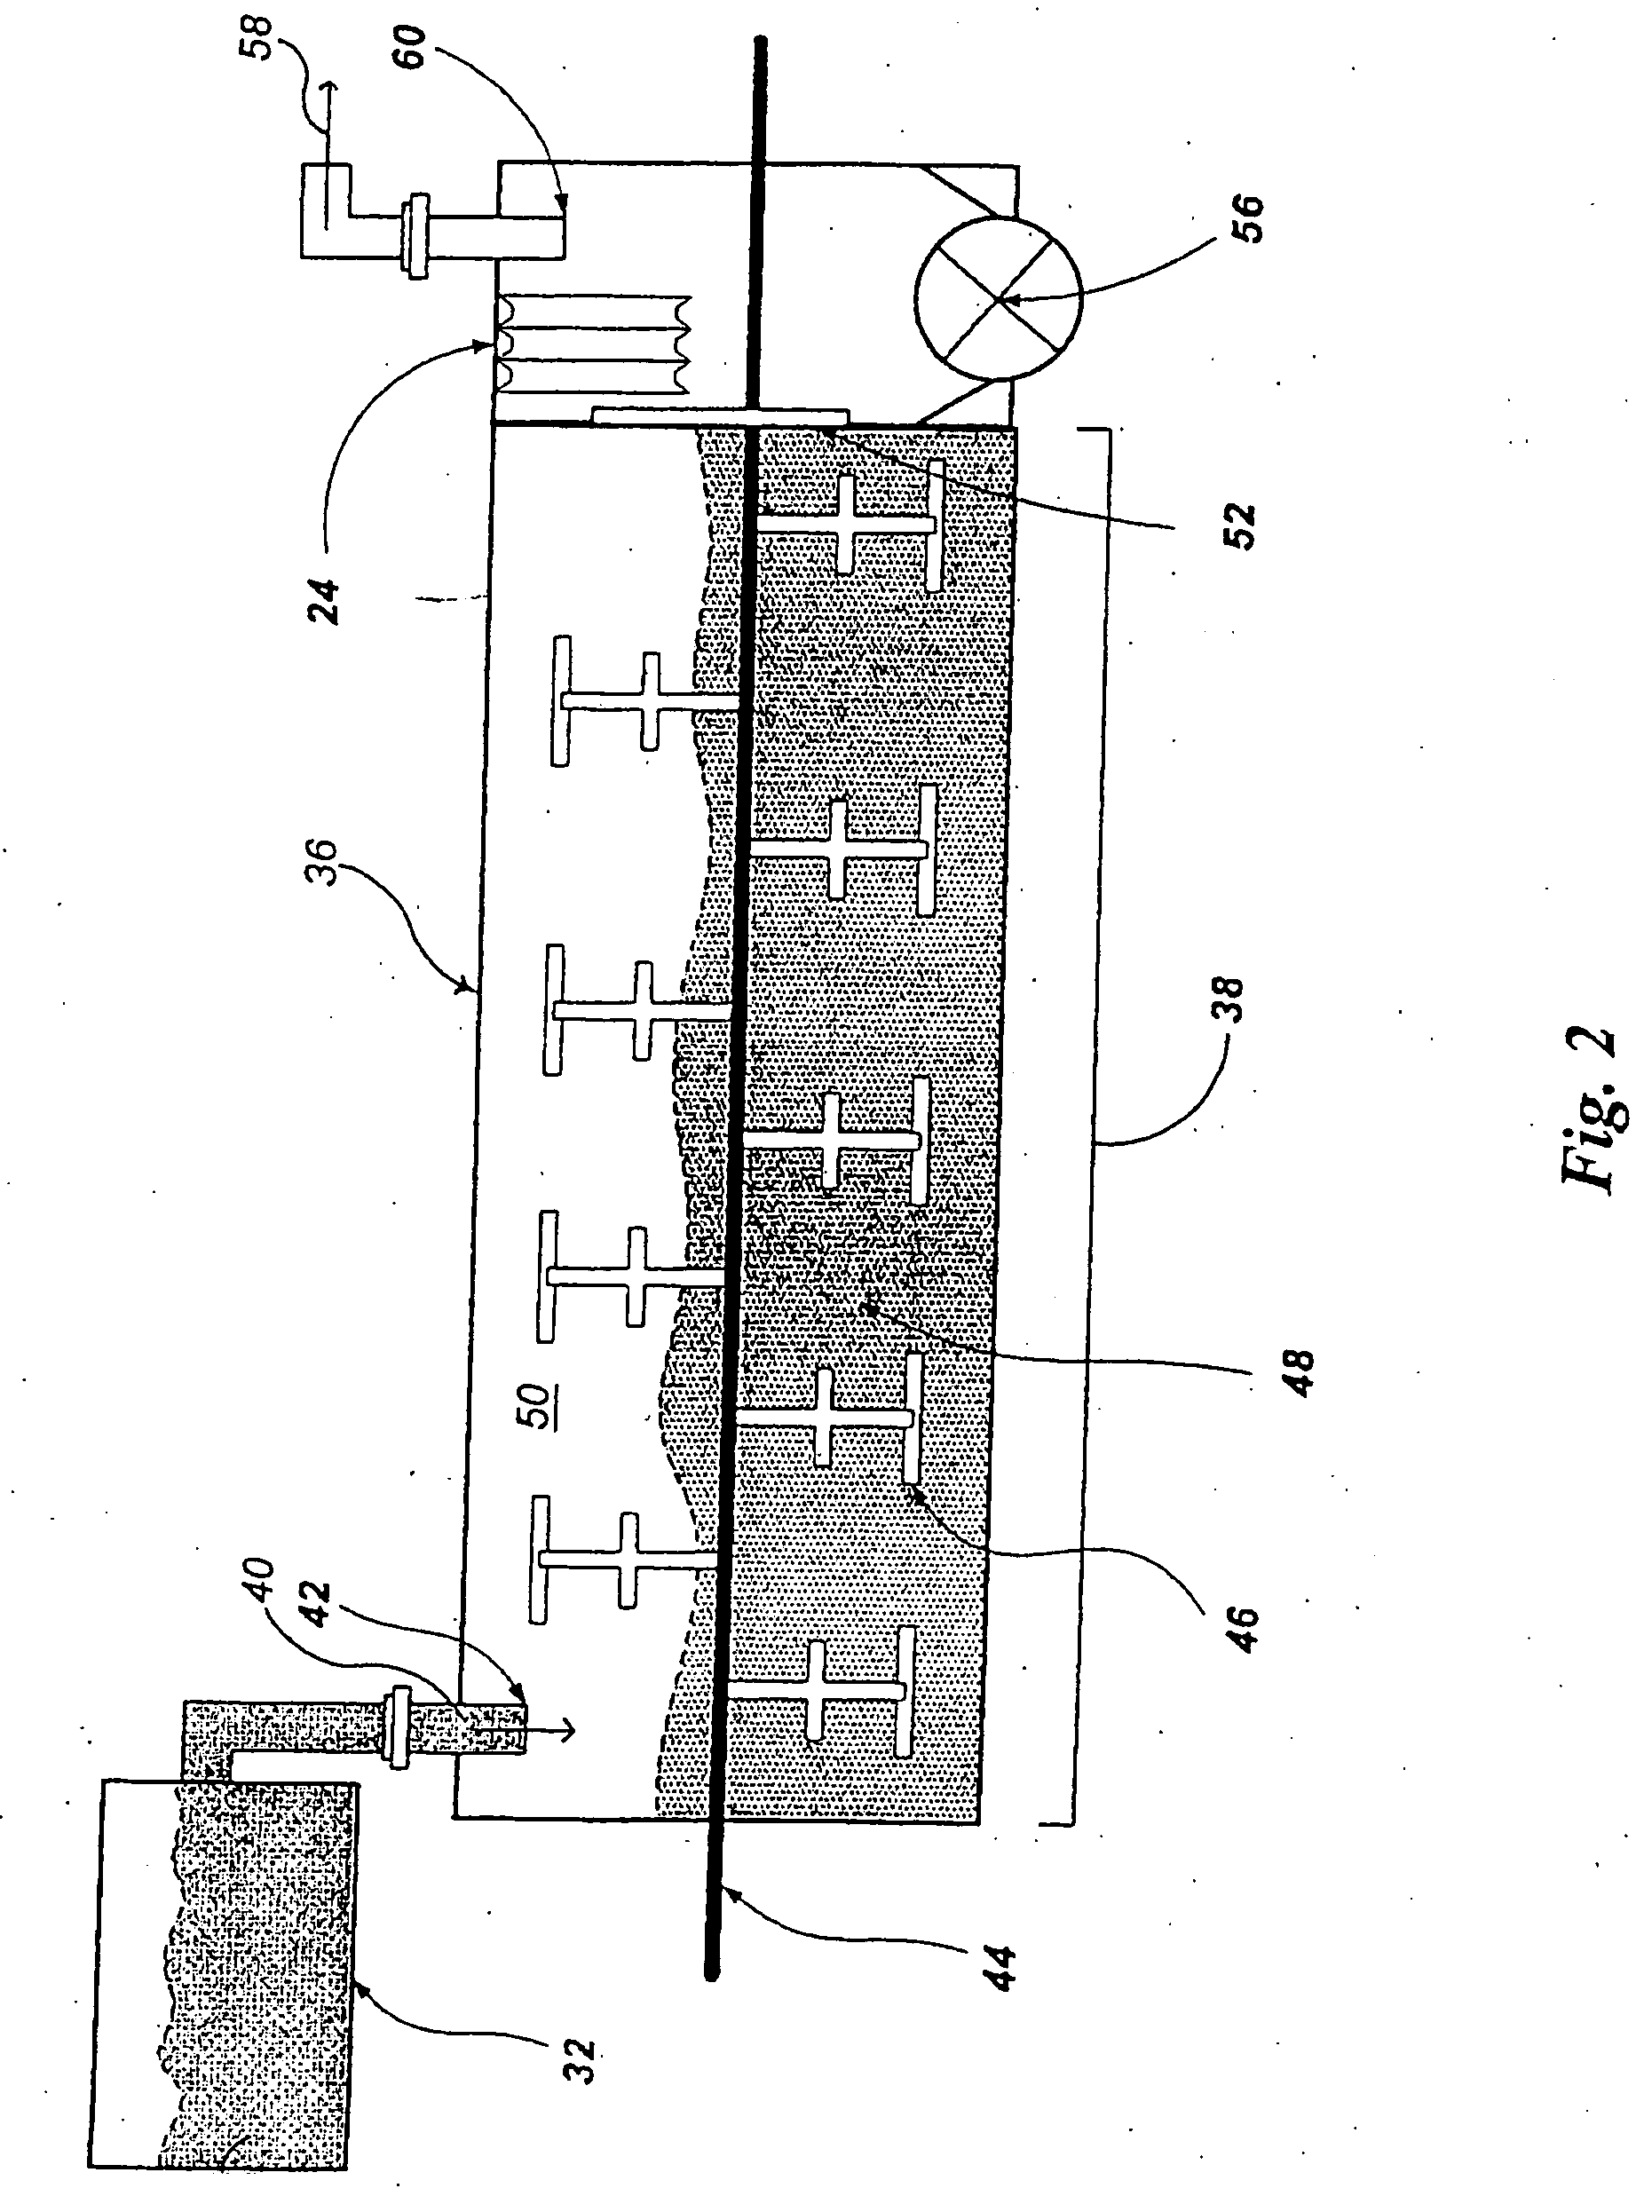 Systems and methods for organic material conversion and use